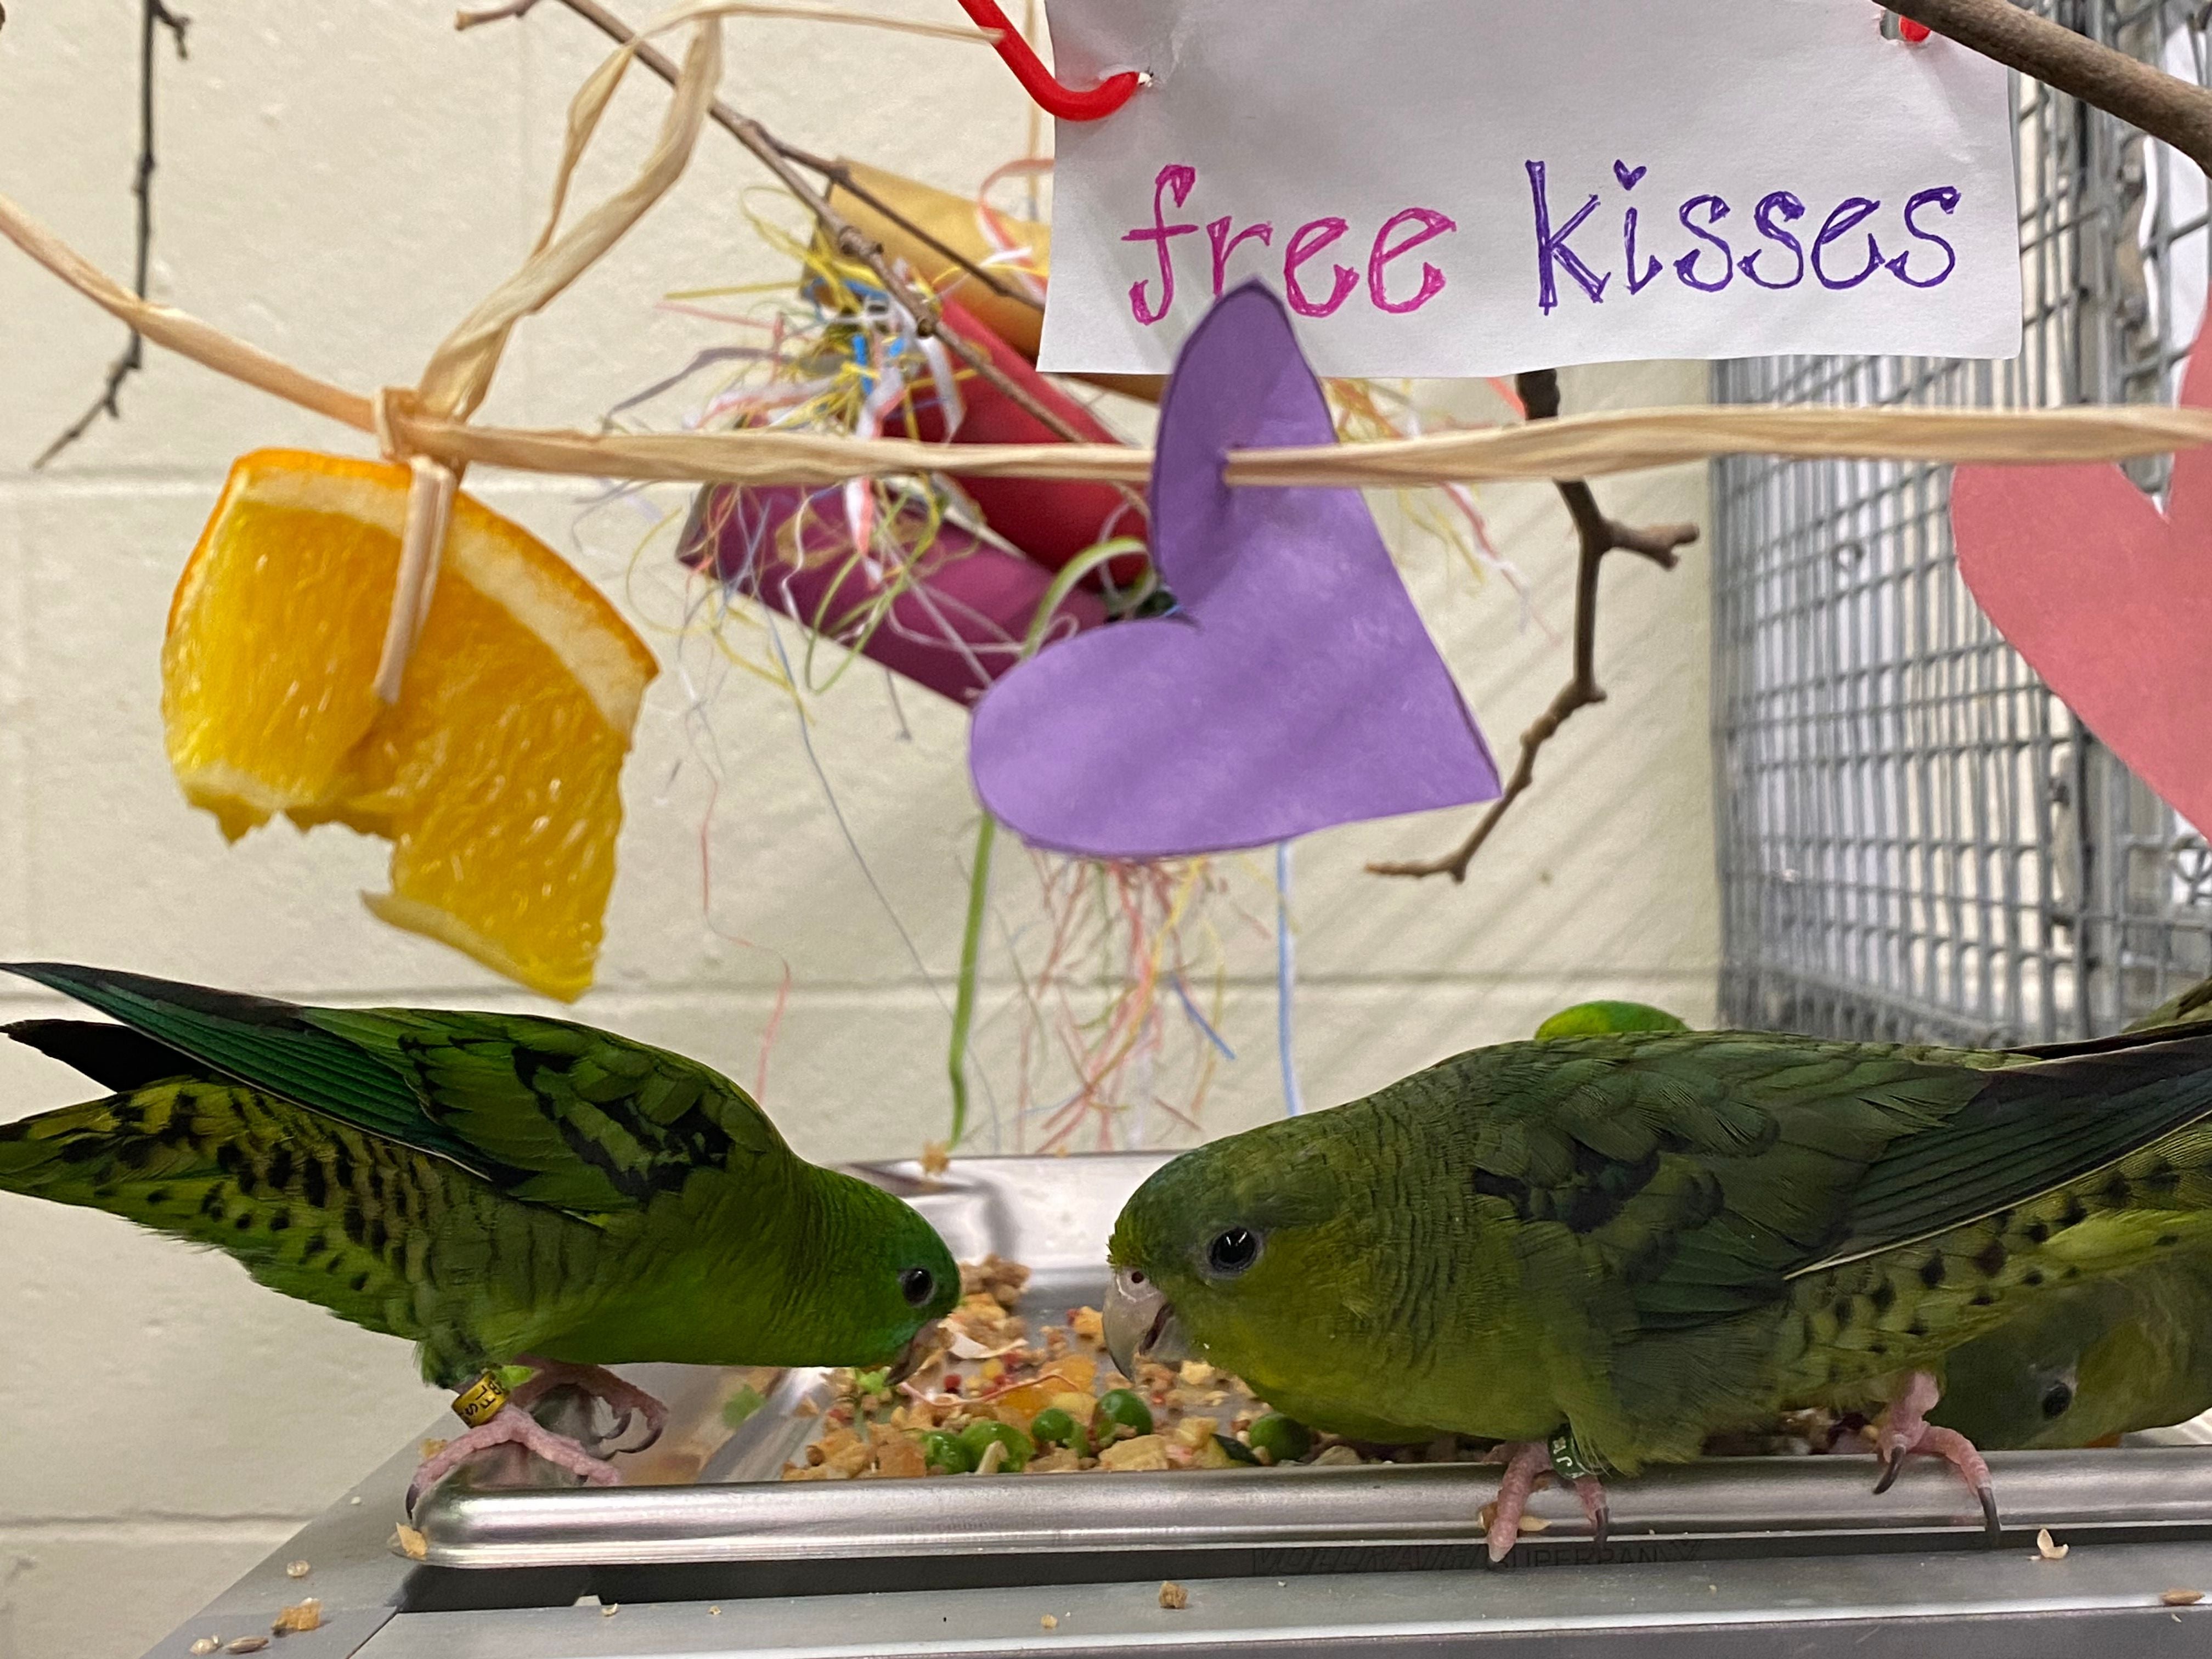 Barred parakeet enjoy treats and heart-shaped Valentine's Day enrichment.